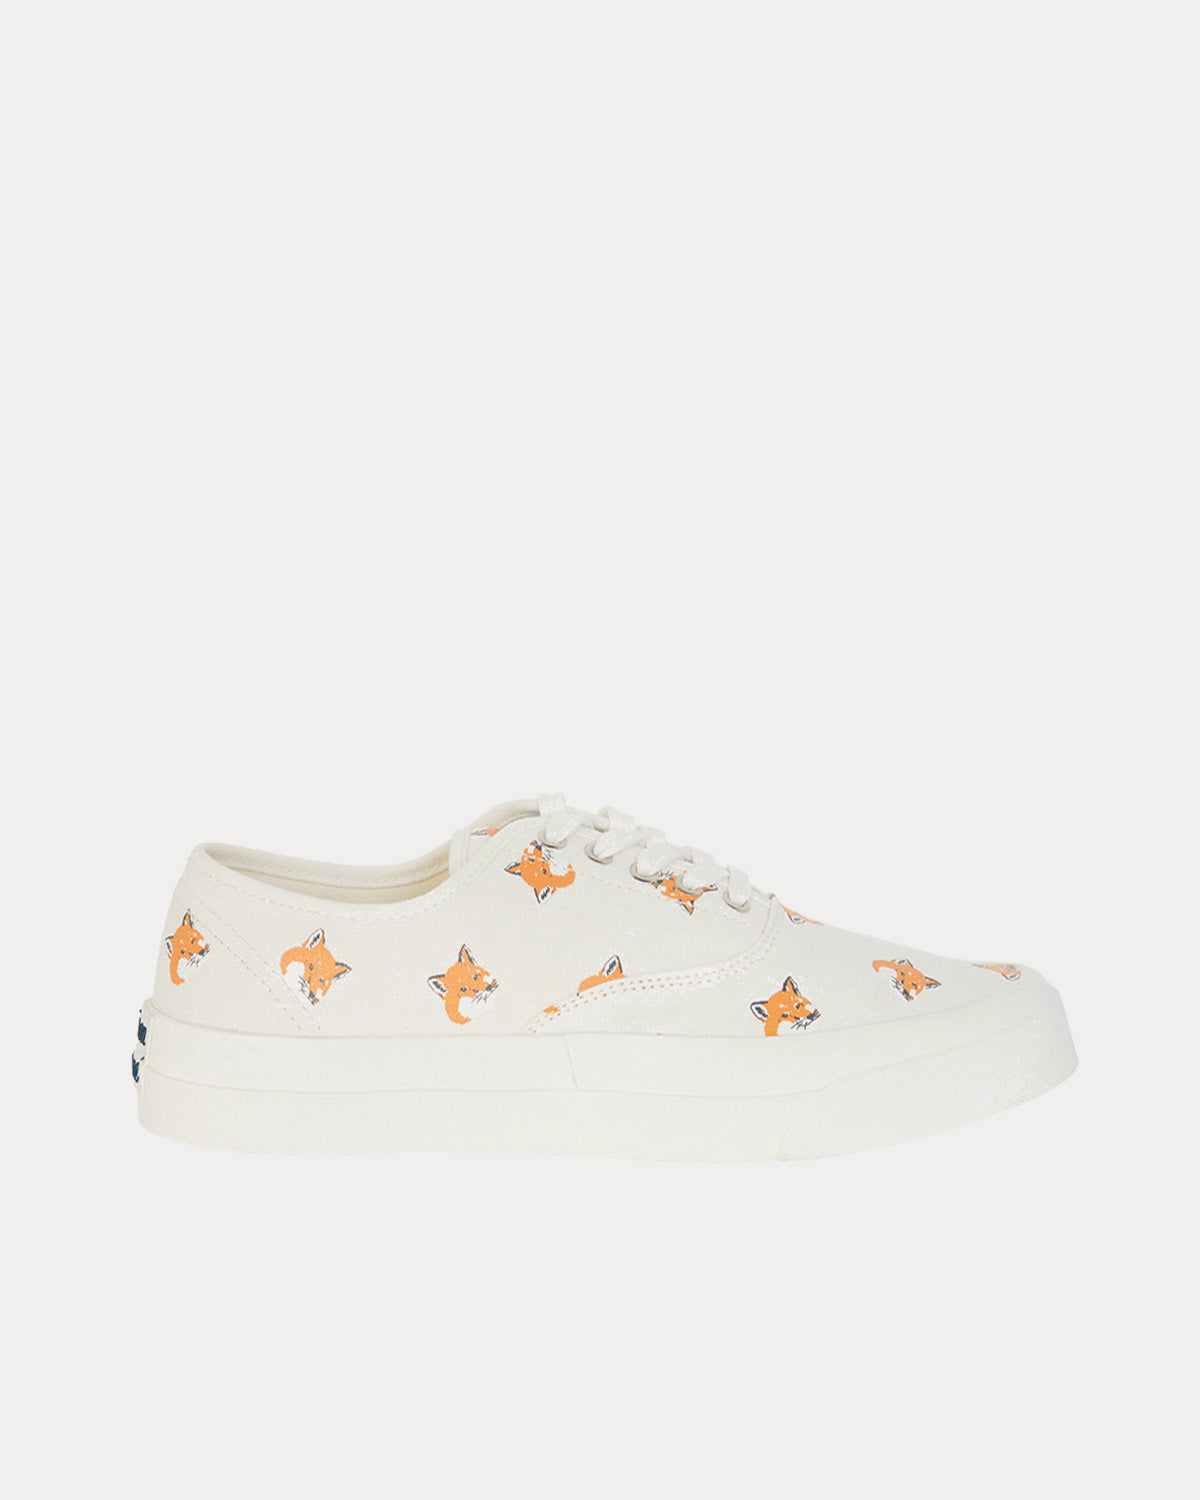 Maison Kitsuné - All Over Fox Head Laced Canvas White Low Top Sneakers